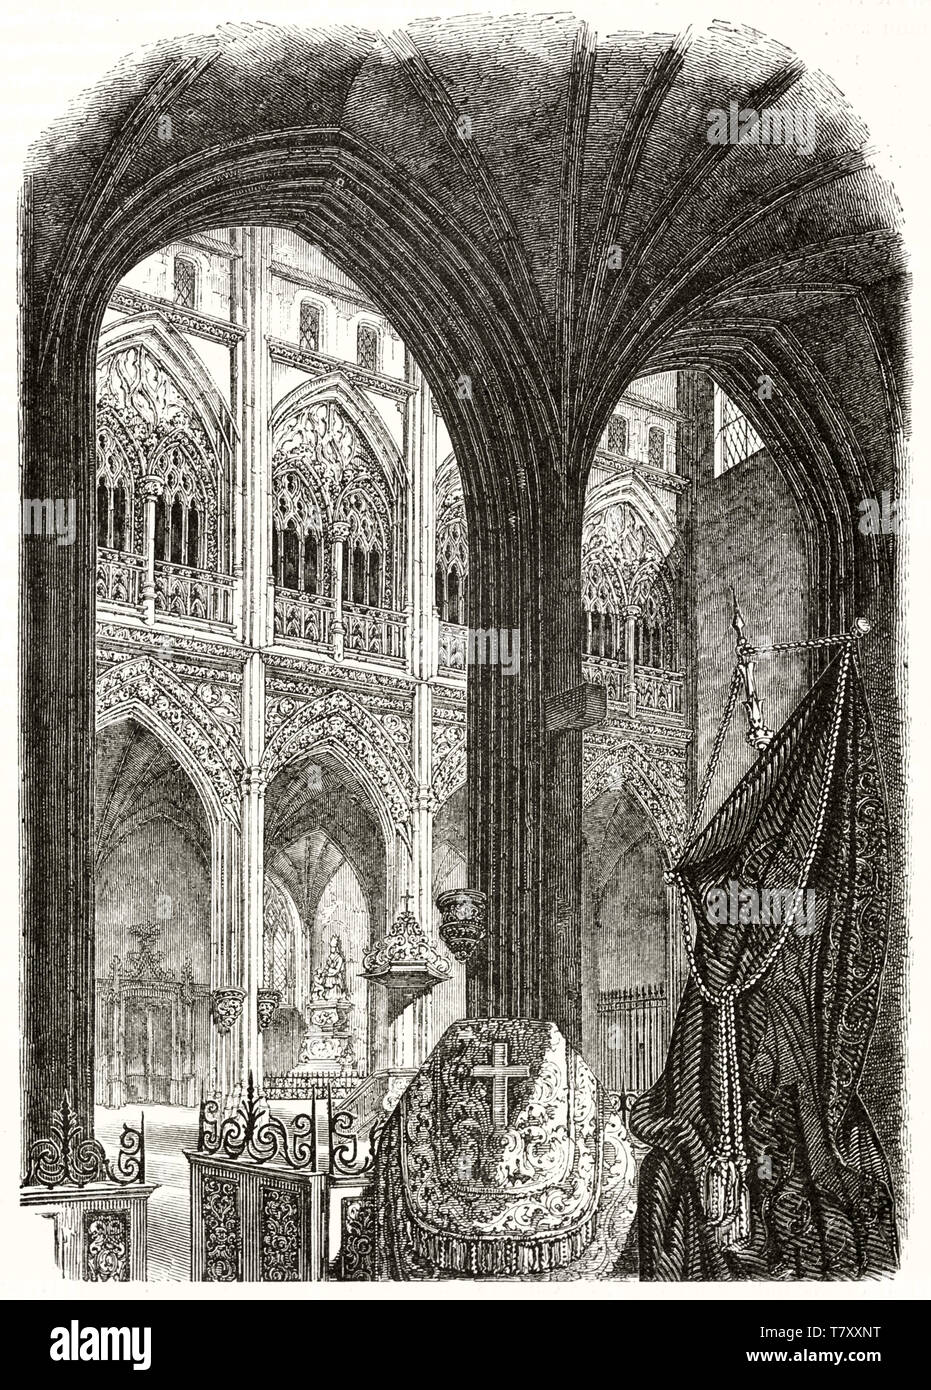 Detail of the view in an ancient gothic church with his pointed arches. Old engraving style illustration of Saint-Ouen church interior Pont-Audemer France. Magasin Pittoresque Paris 1848 Stock Photo